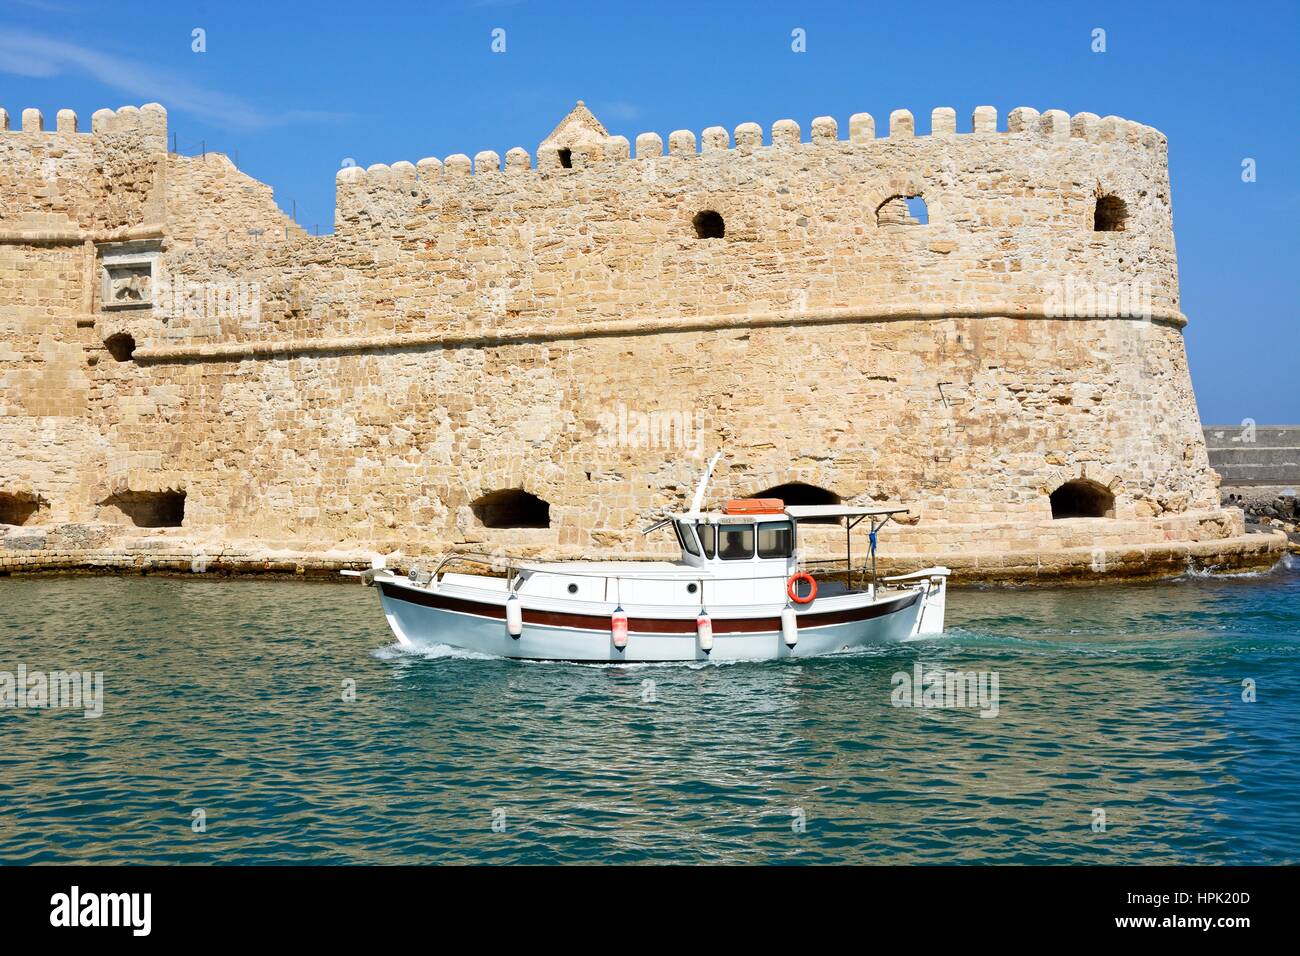 View of Koules castle with a boat in the foreground, Heraklion, Crete, Greece, Europe. Stock Photo